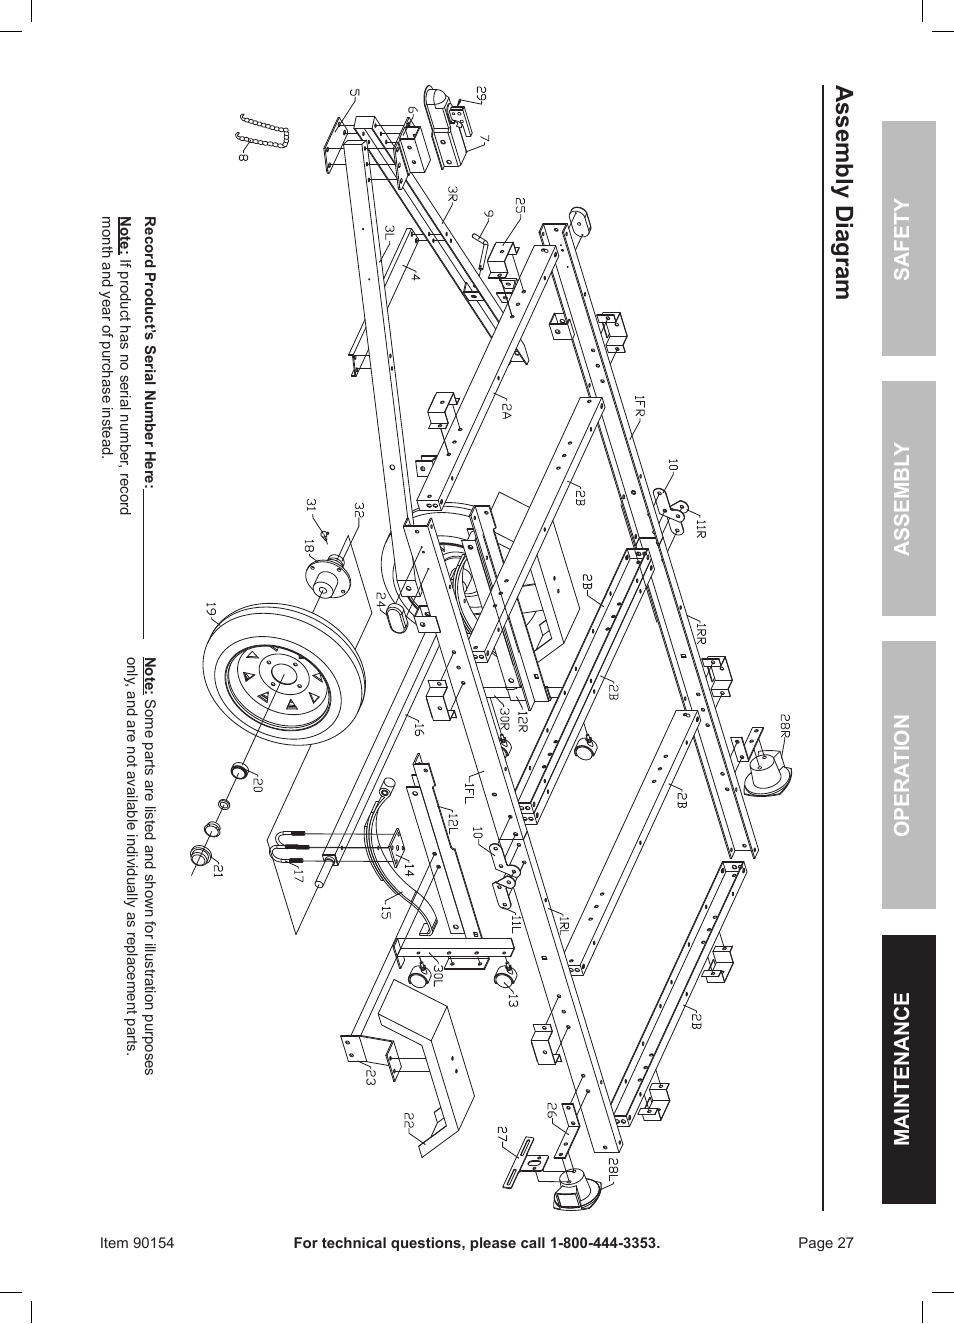 Assembly diagram | Harbor Freight Tools Foldable Utility Trailer 90154